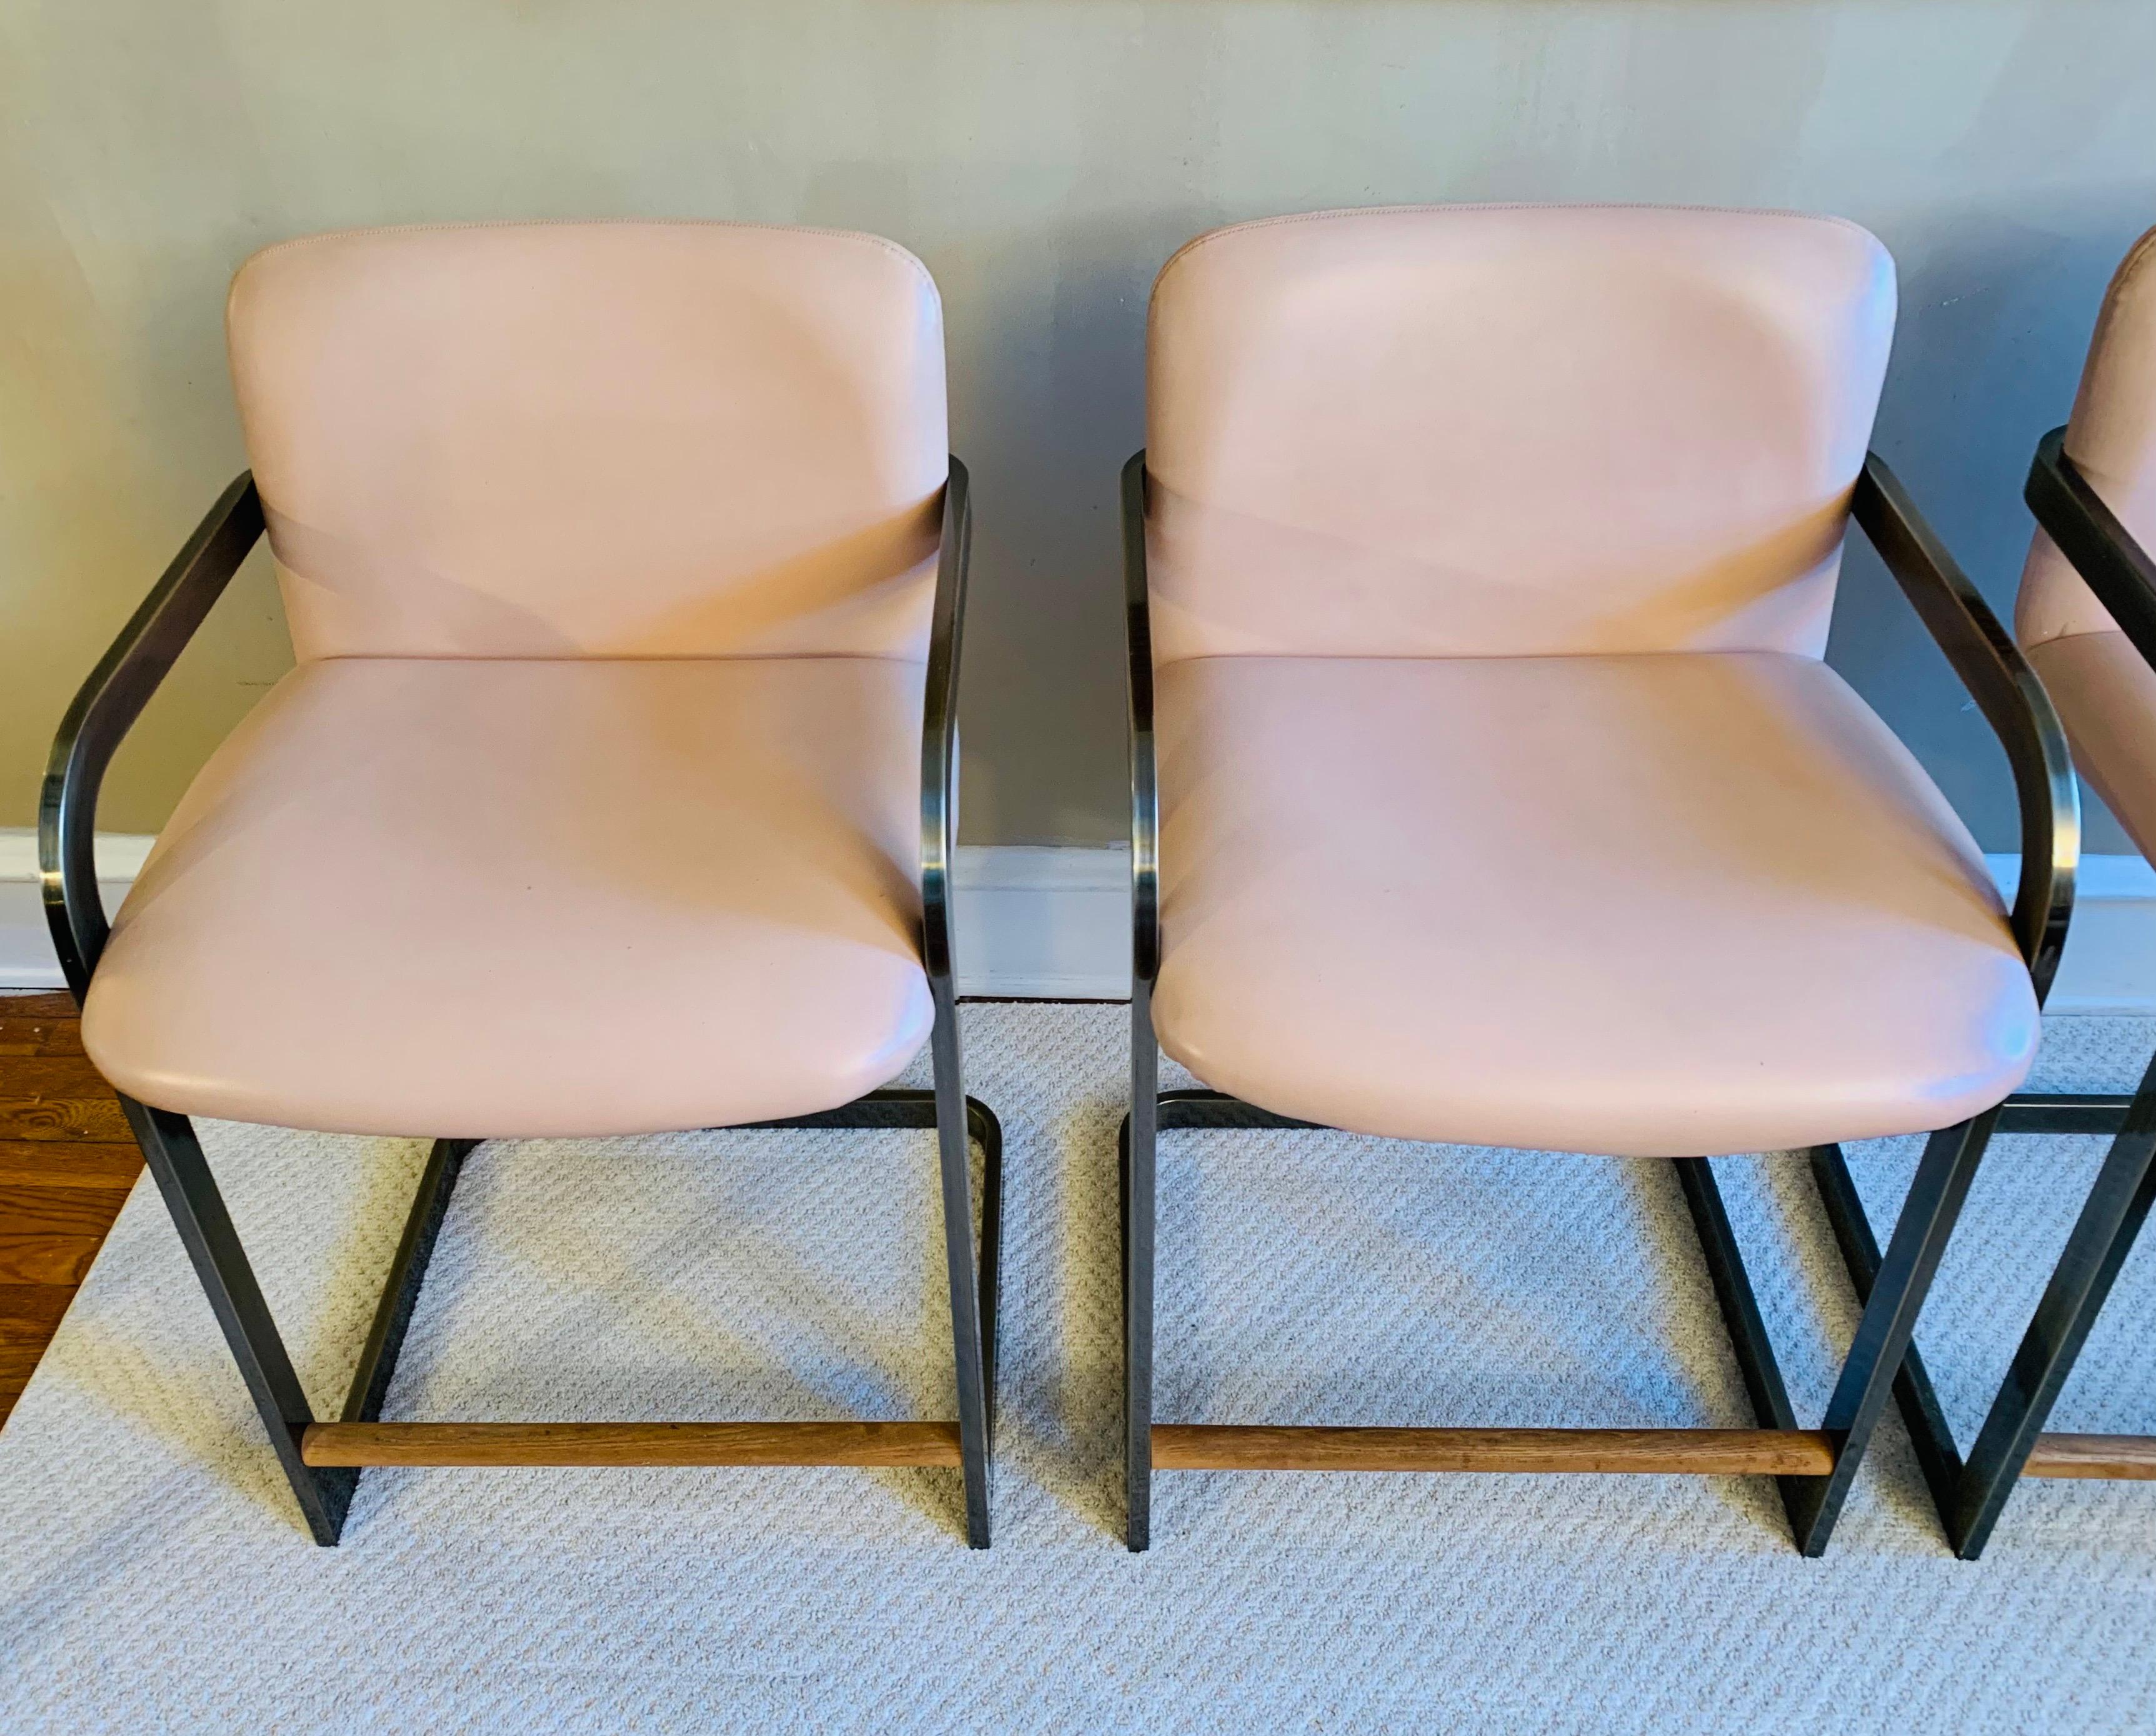 Metal Vintage Midcentury Cantilever Stools in the Milo Baughman Style by D.I.A. 1980's